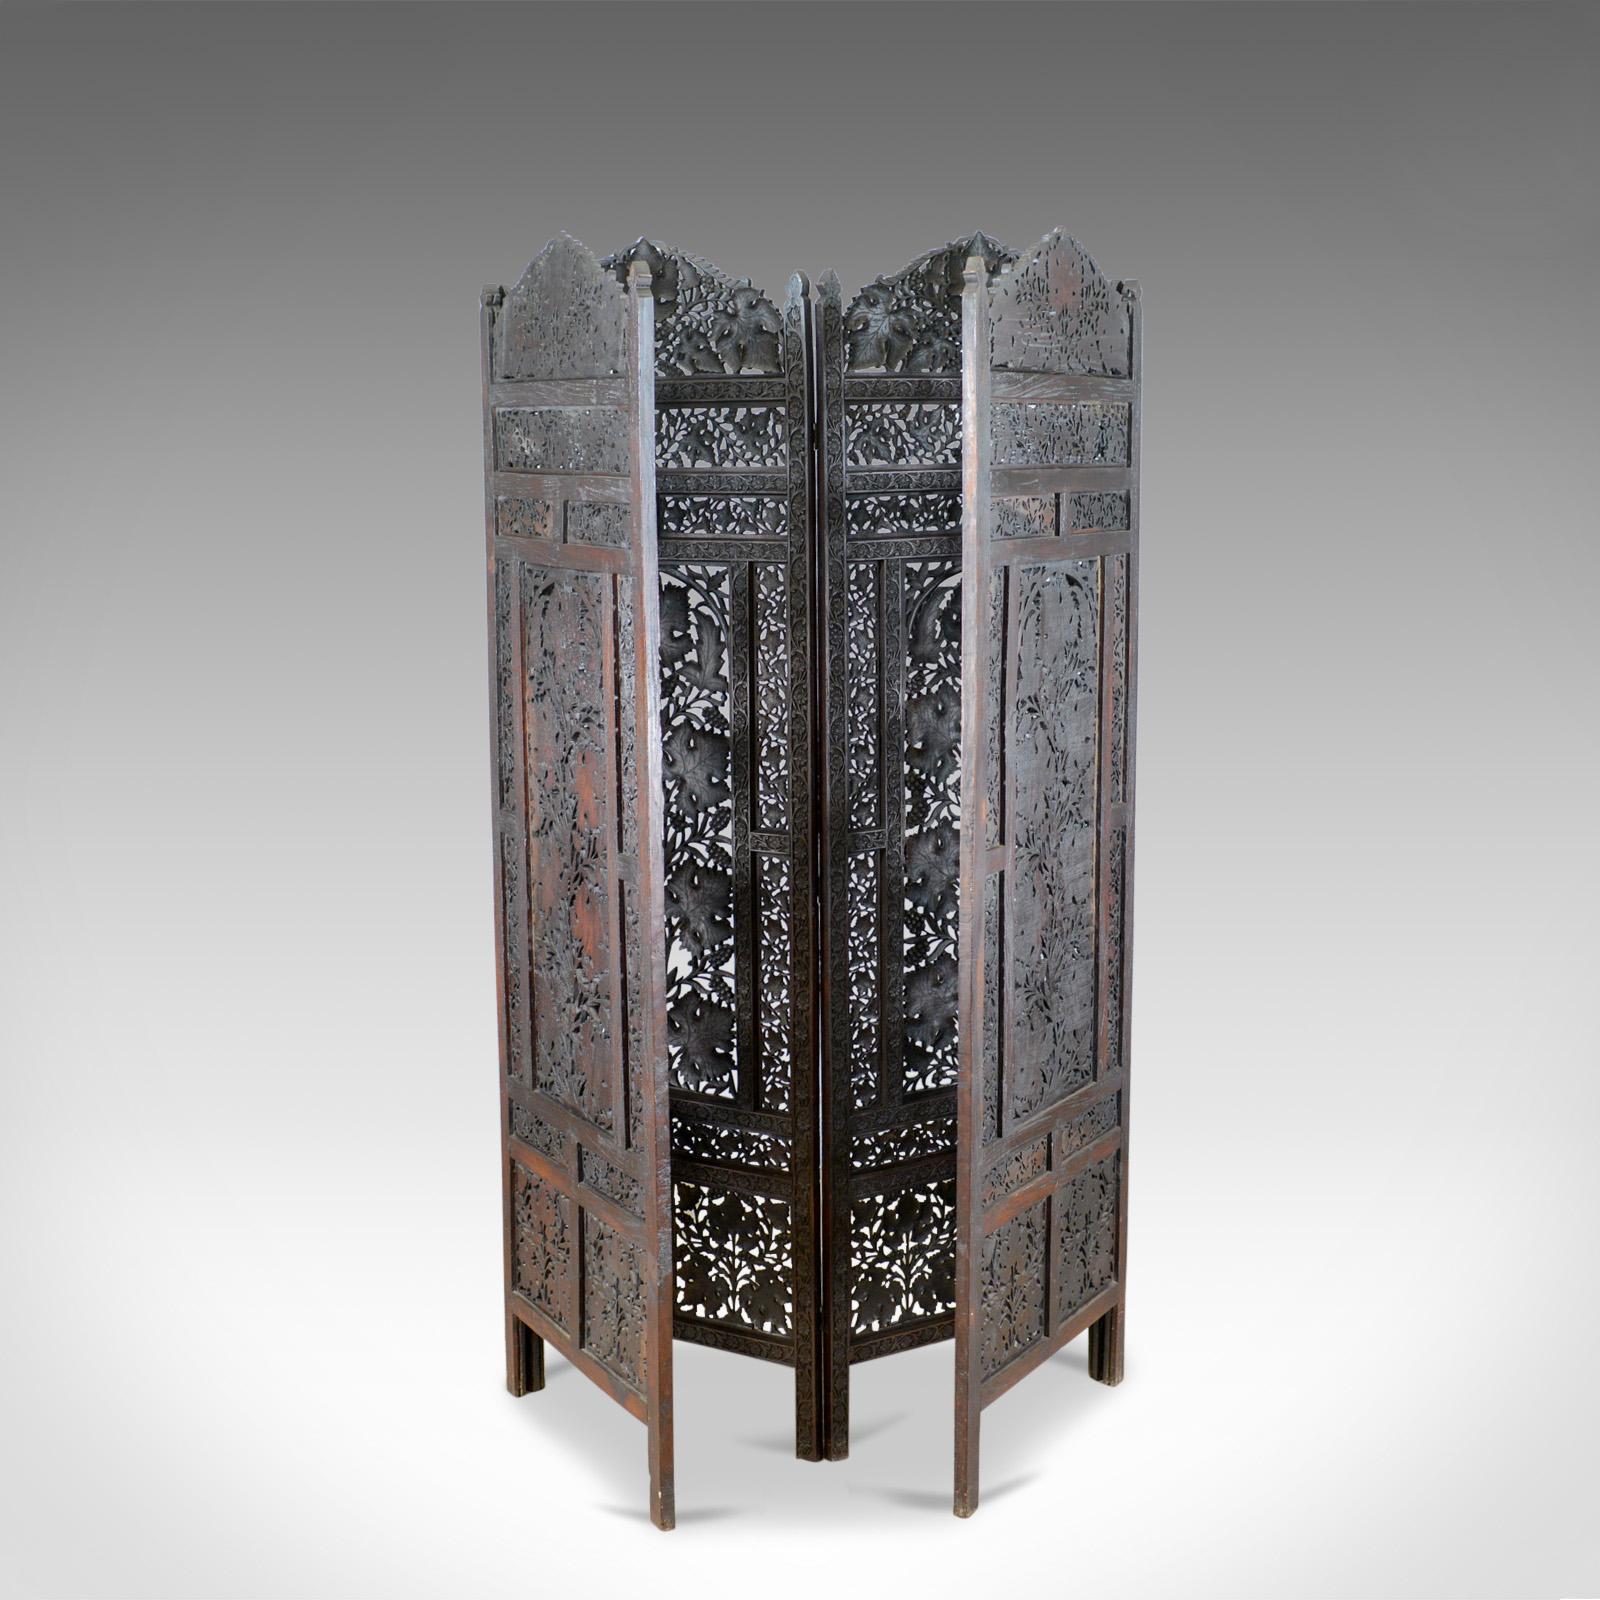 This is a vintage 1940s folding screen, a four-panel screen. A teak, pierced, fretwork room divider perfect as a photographer's prop dating to the Art Deco period.

A profusion of pierced fretwork expertly executed
Tantalising panels of carved